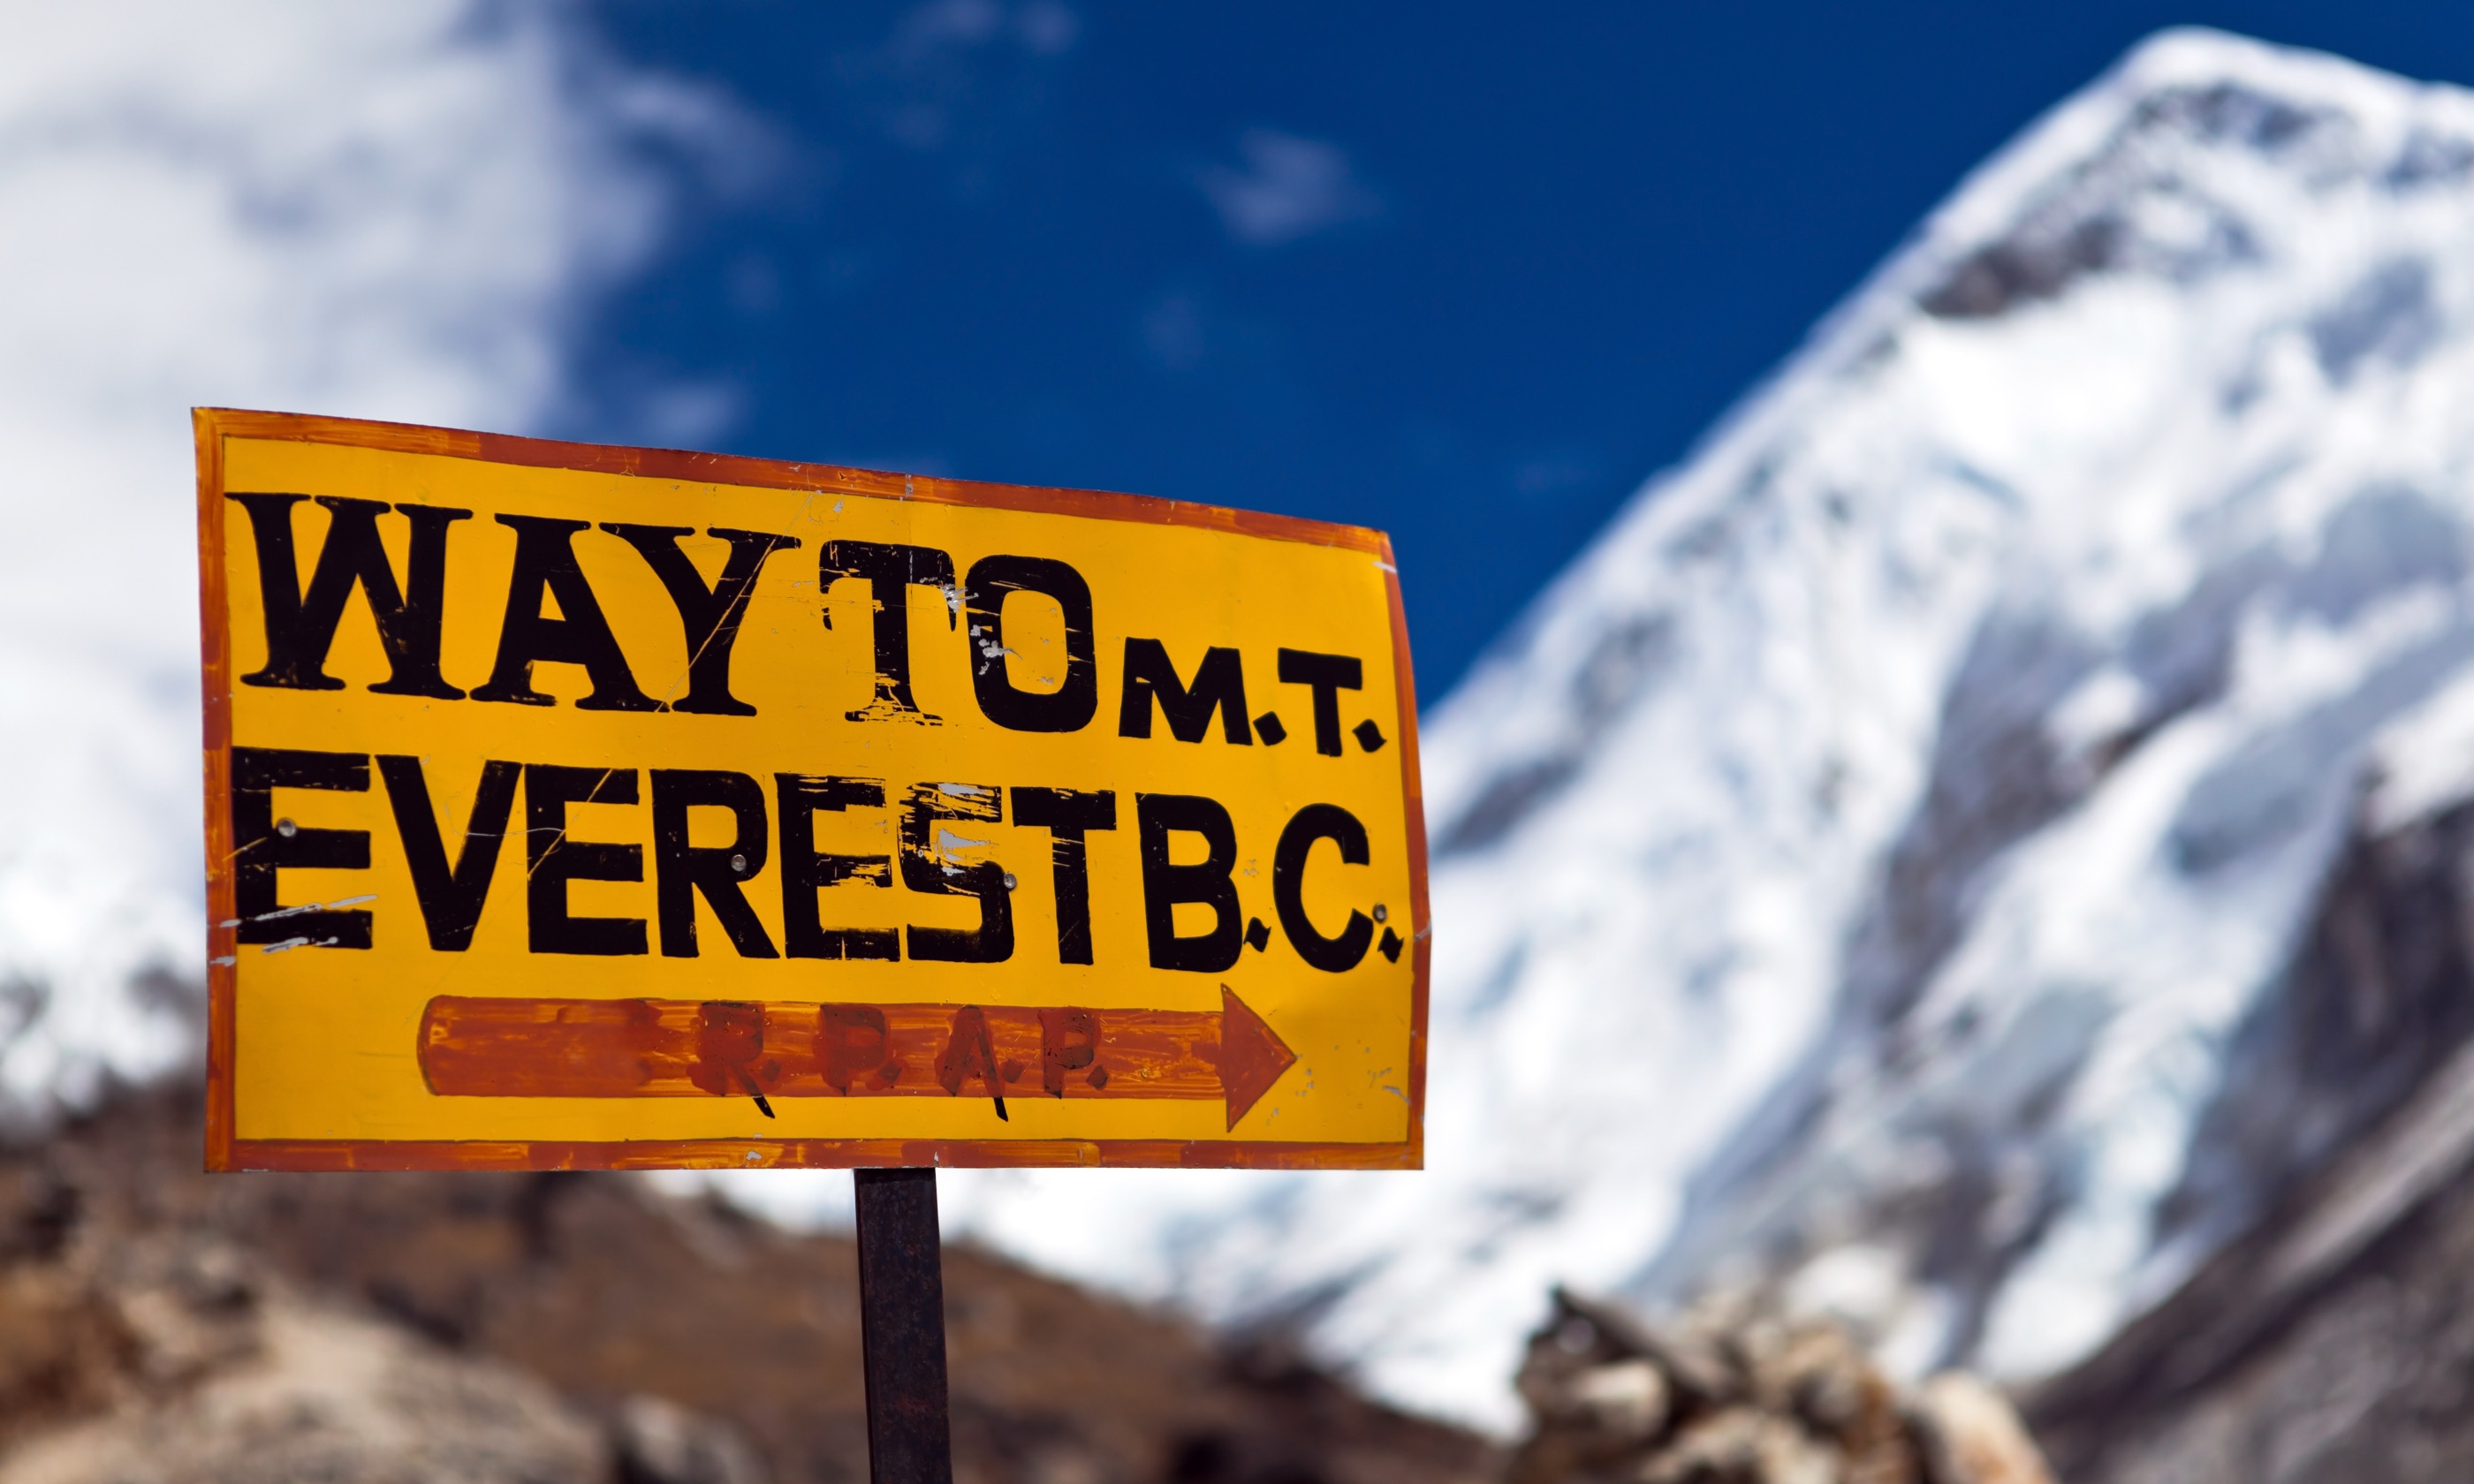 Sign pointing the way to Everest Base Camp (Shutterstock.com. See main credit below)